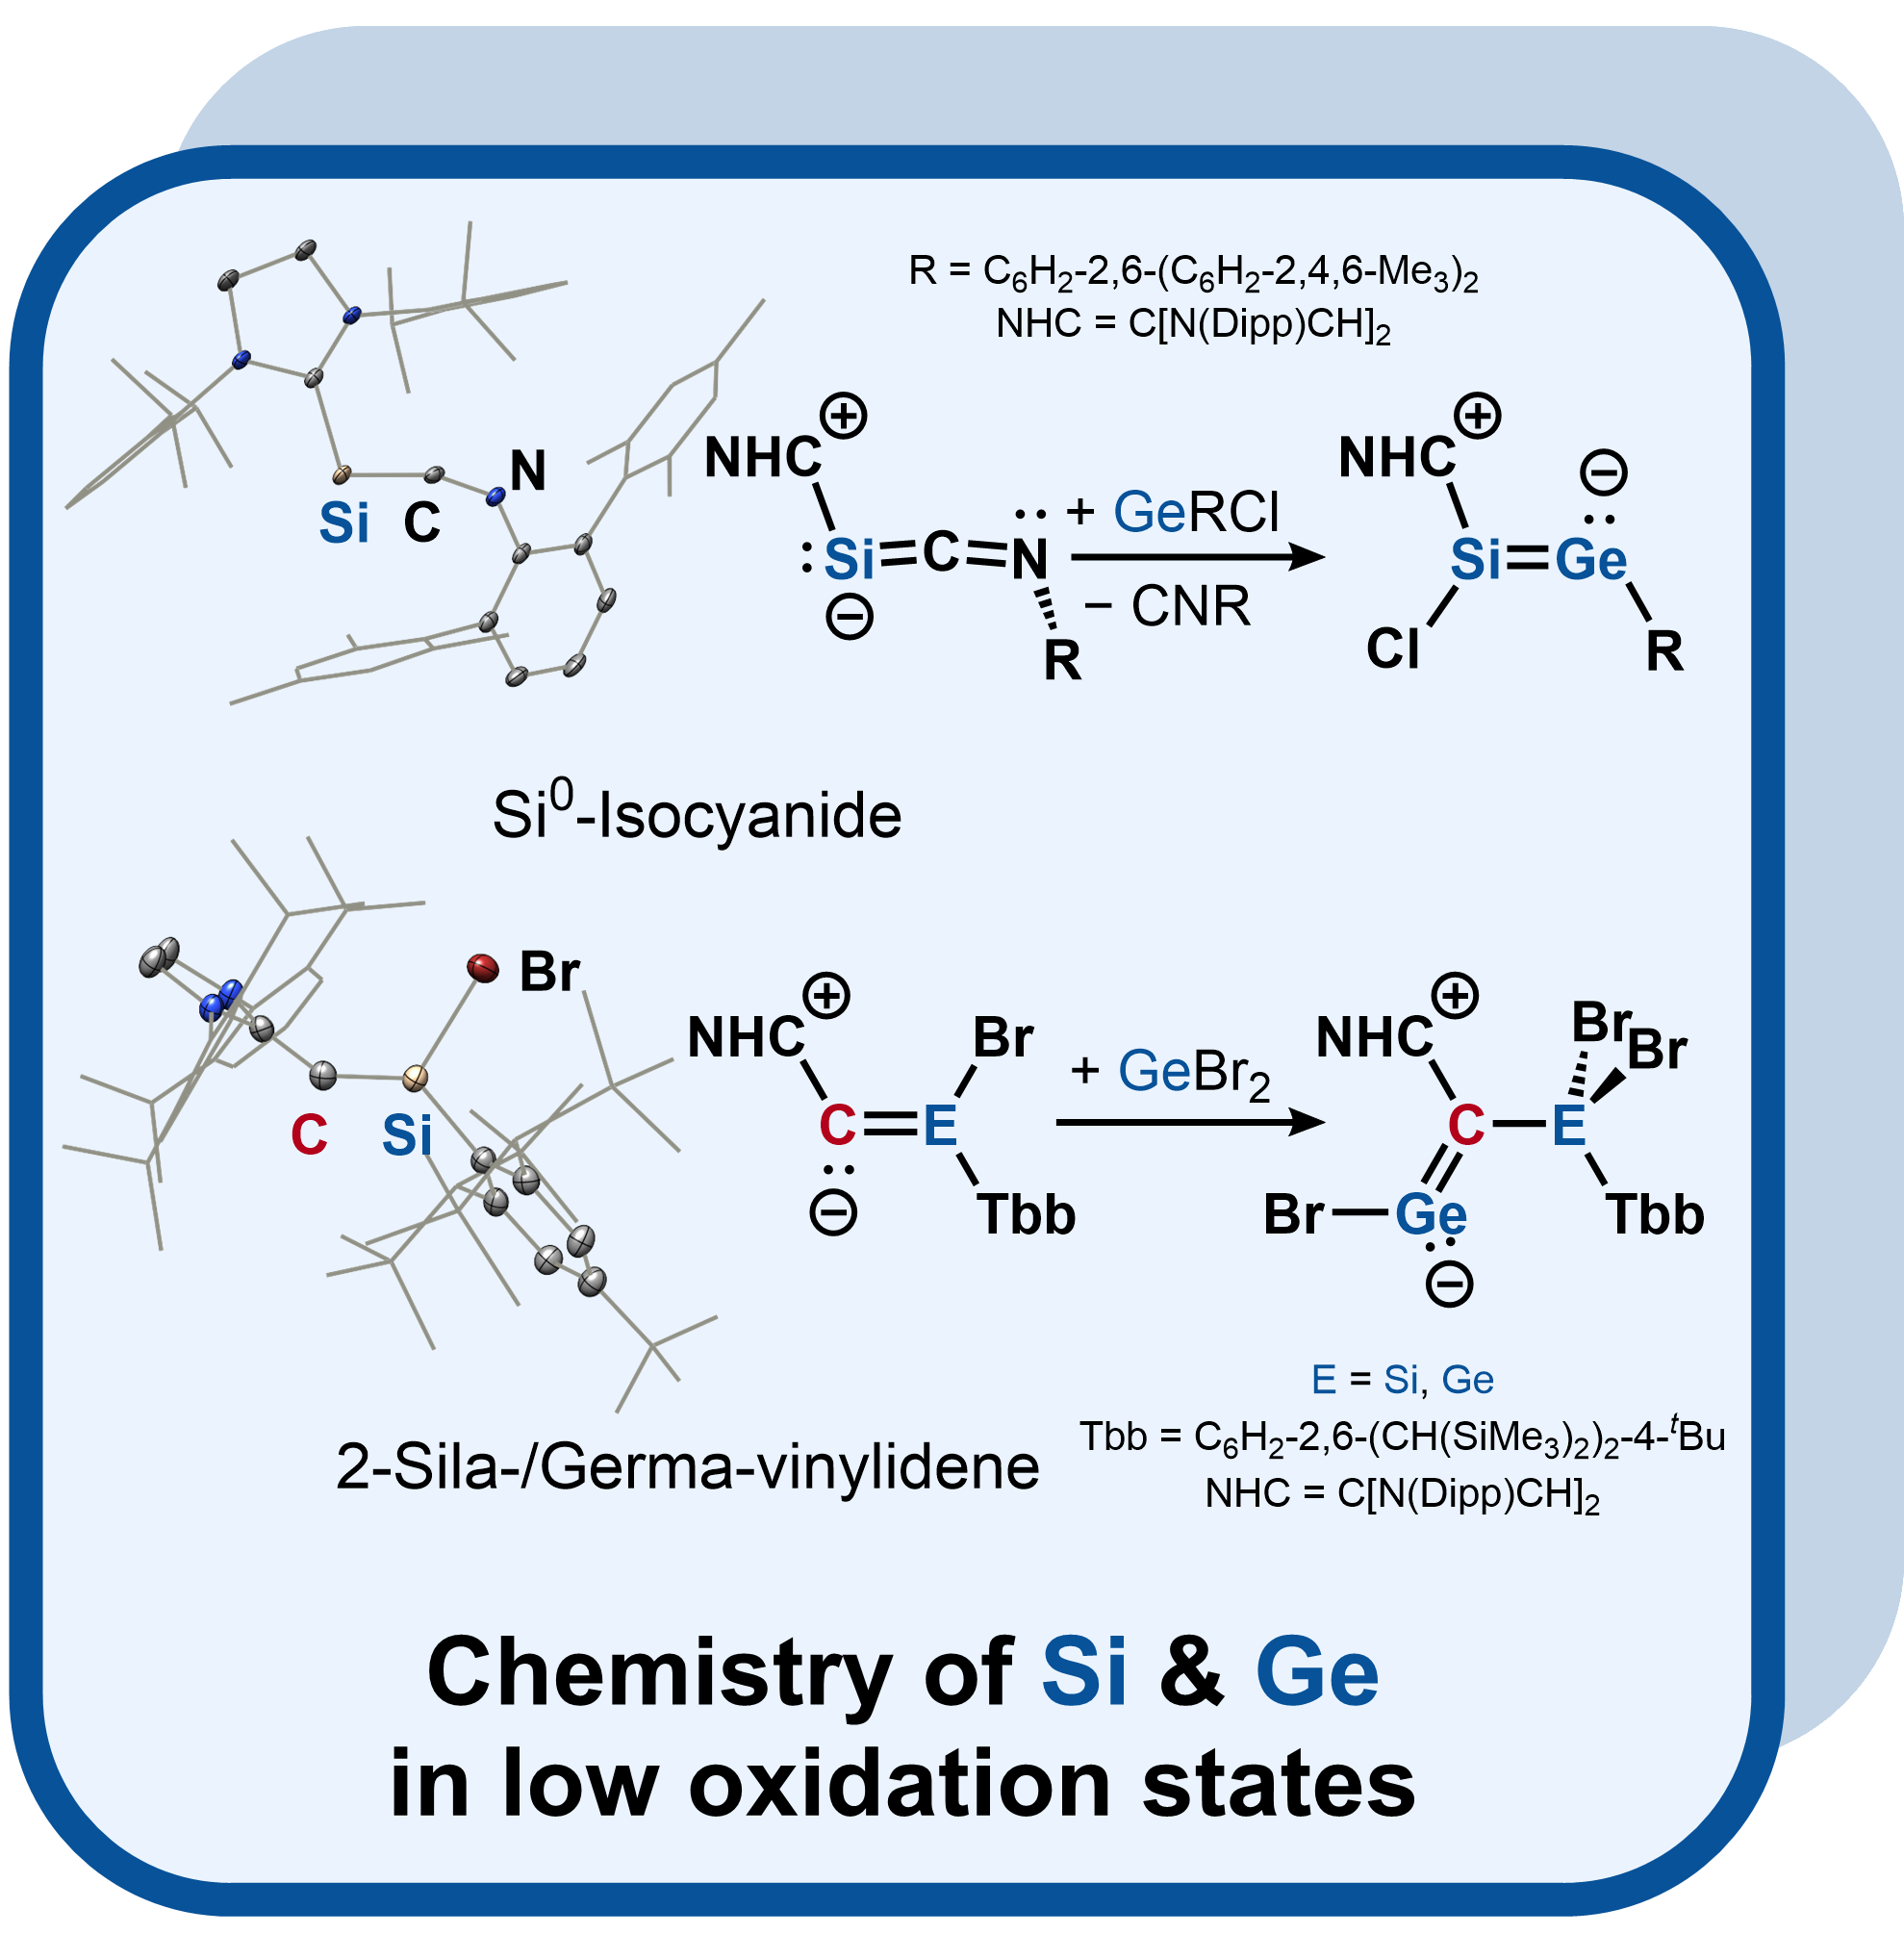 Chemistry of Si and Ge in low oxidation states